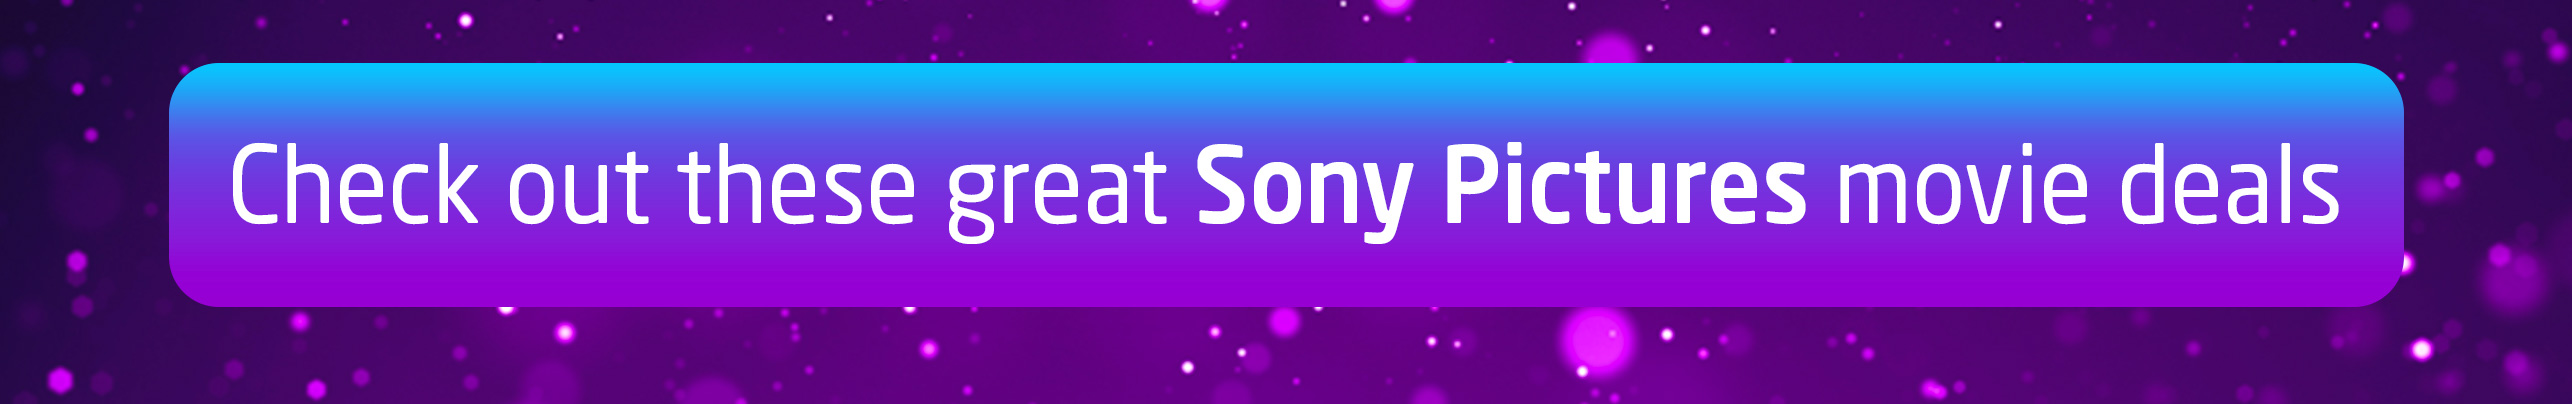 Movies Anyhwere Sony Pictures Deals